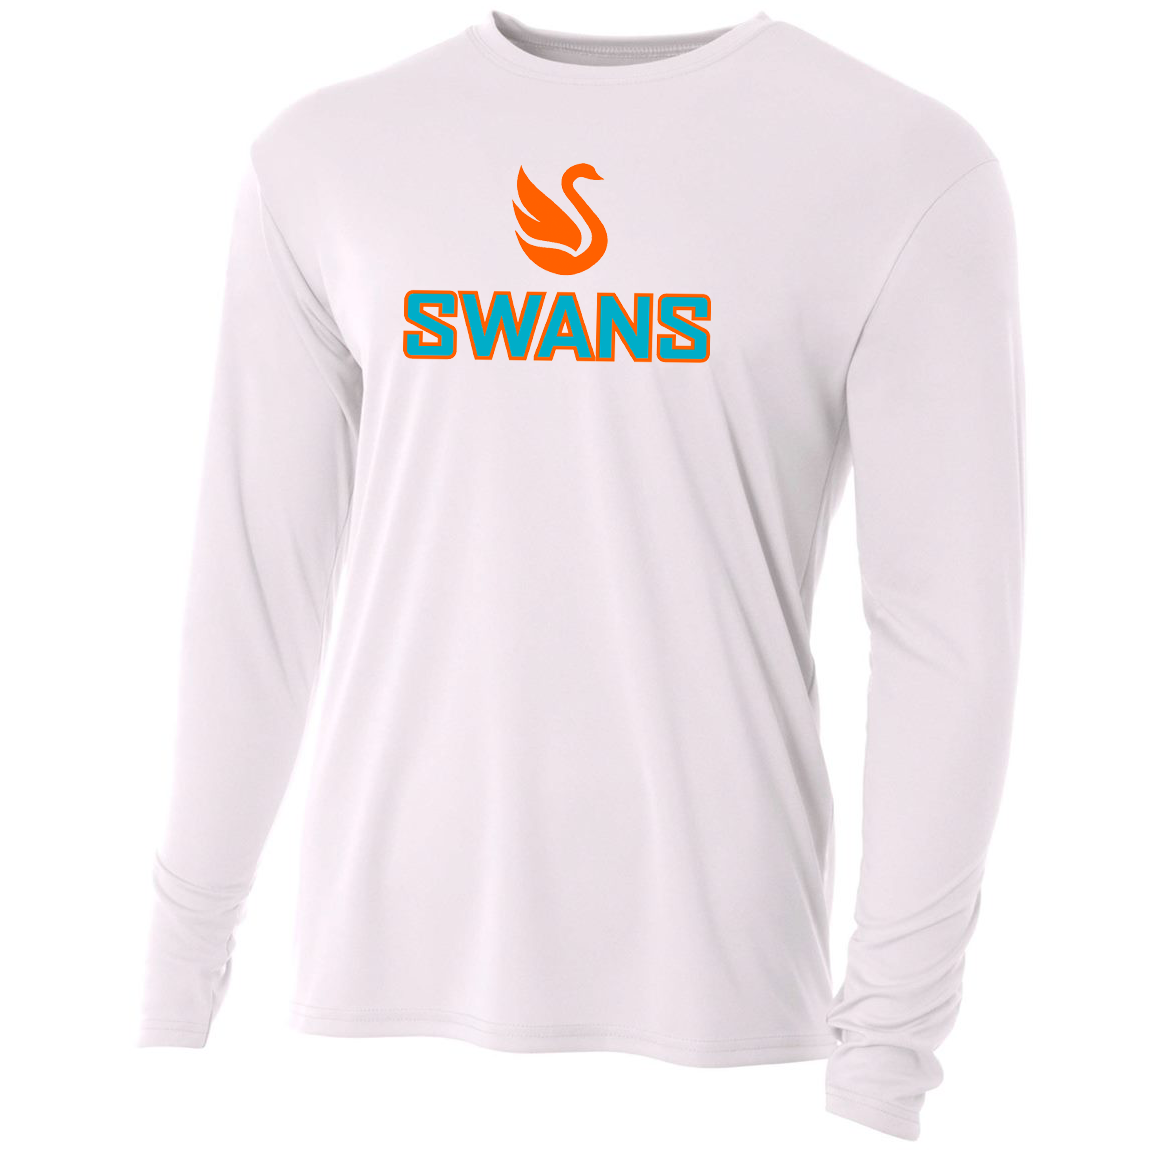 Swans Lacrosse A4 Cooling Performance L/S Crew